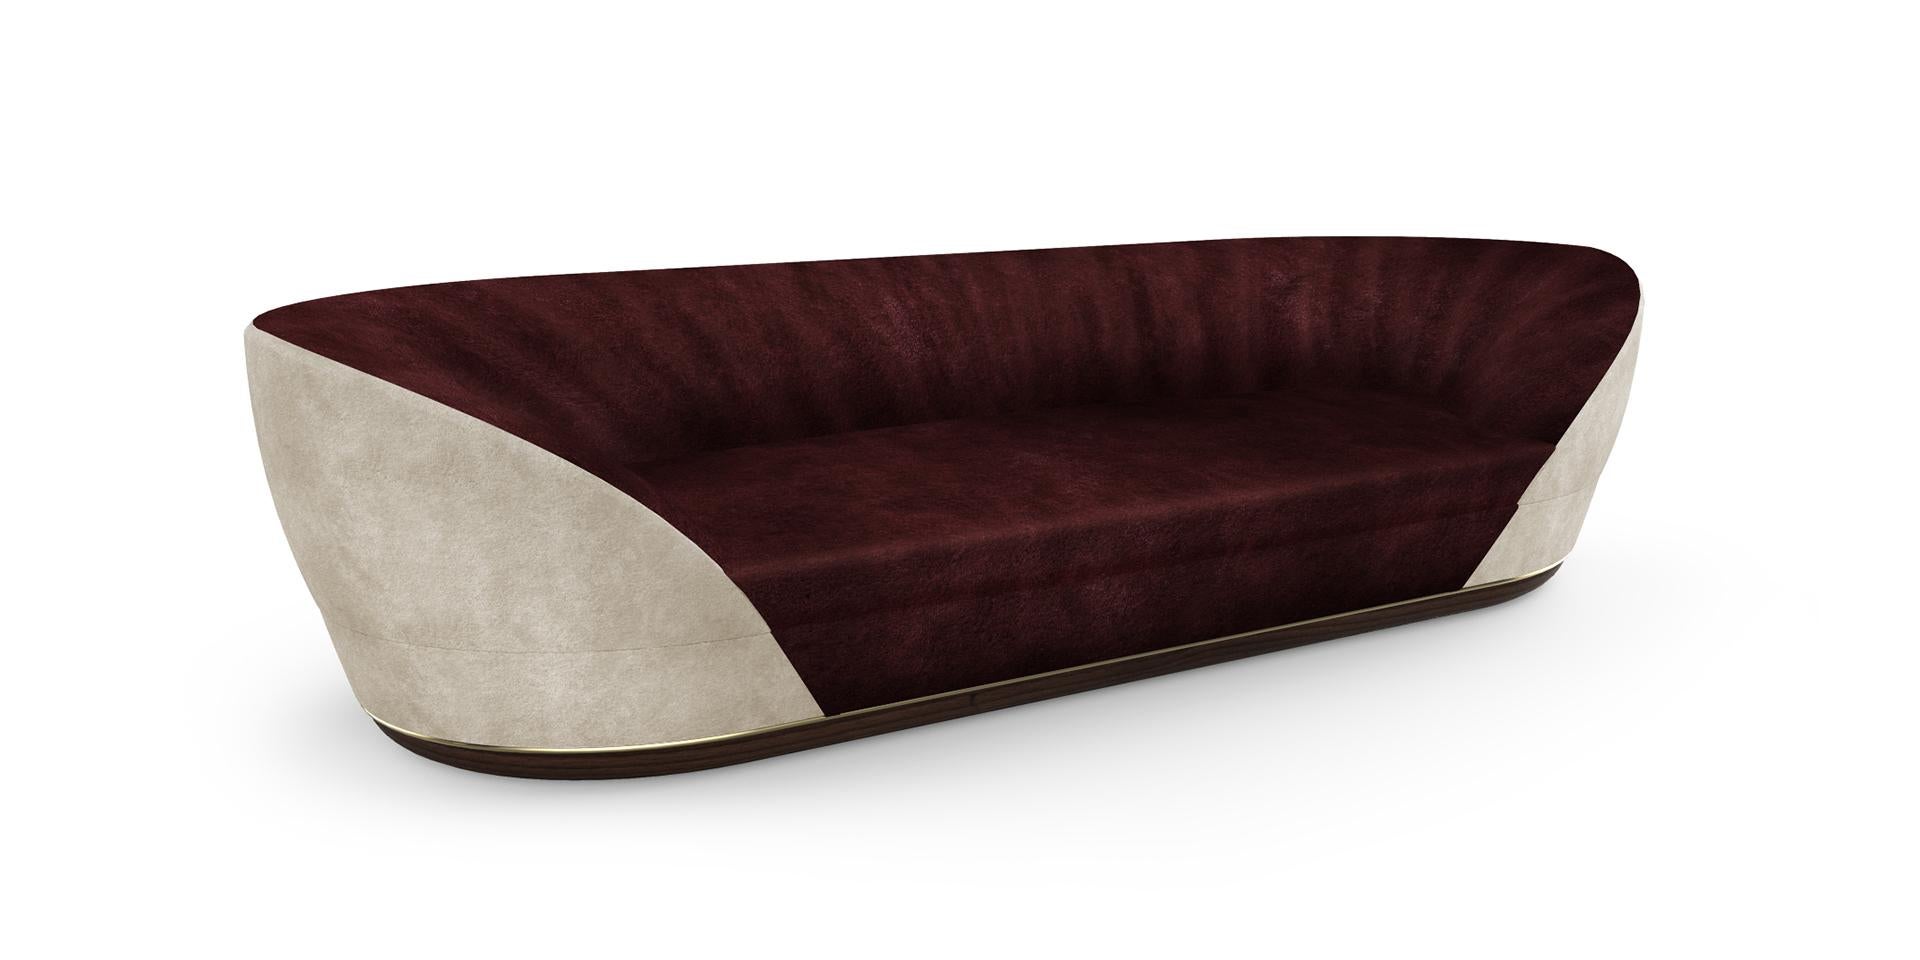 Comfortable and stunning, this sofa is ideal for those who are looking for a cozy and elegant atmosphere in the living room. With velvet draped texture is perfect for intense moments of relaxation.

Upholstered in super sued fabrics. 
Footer in